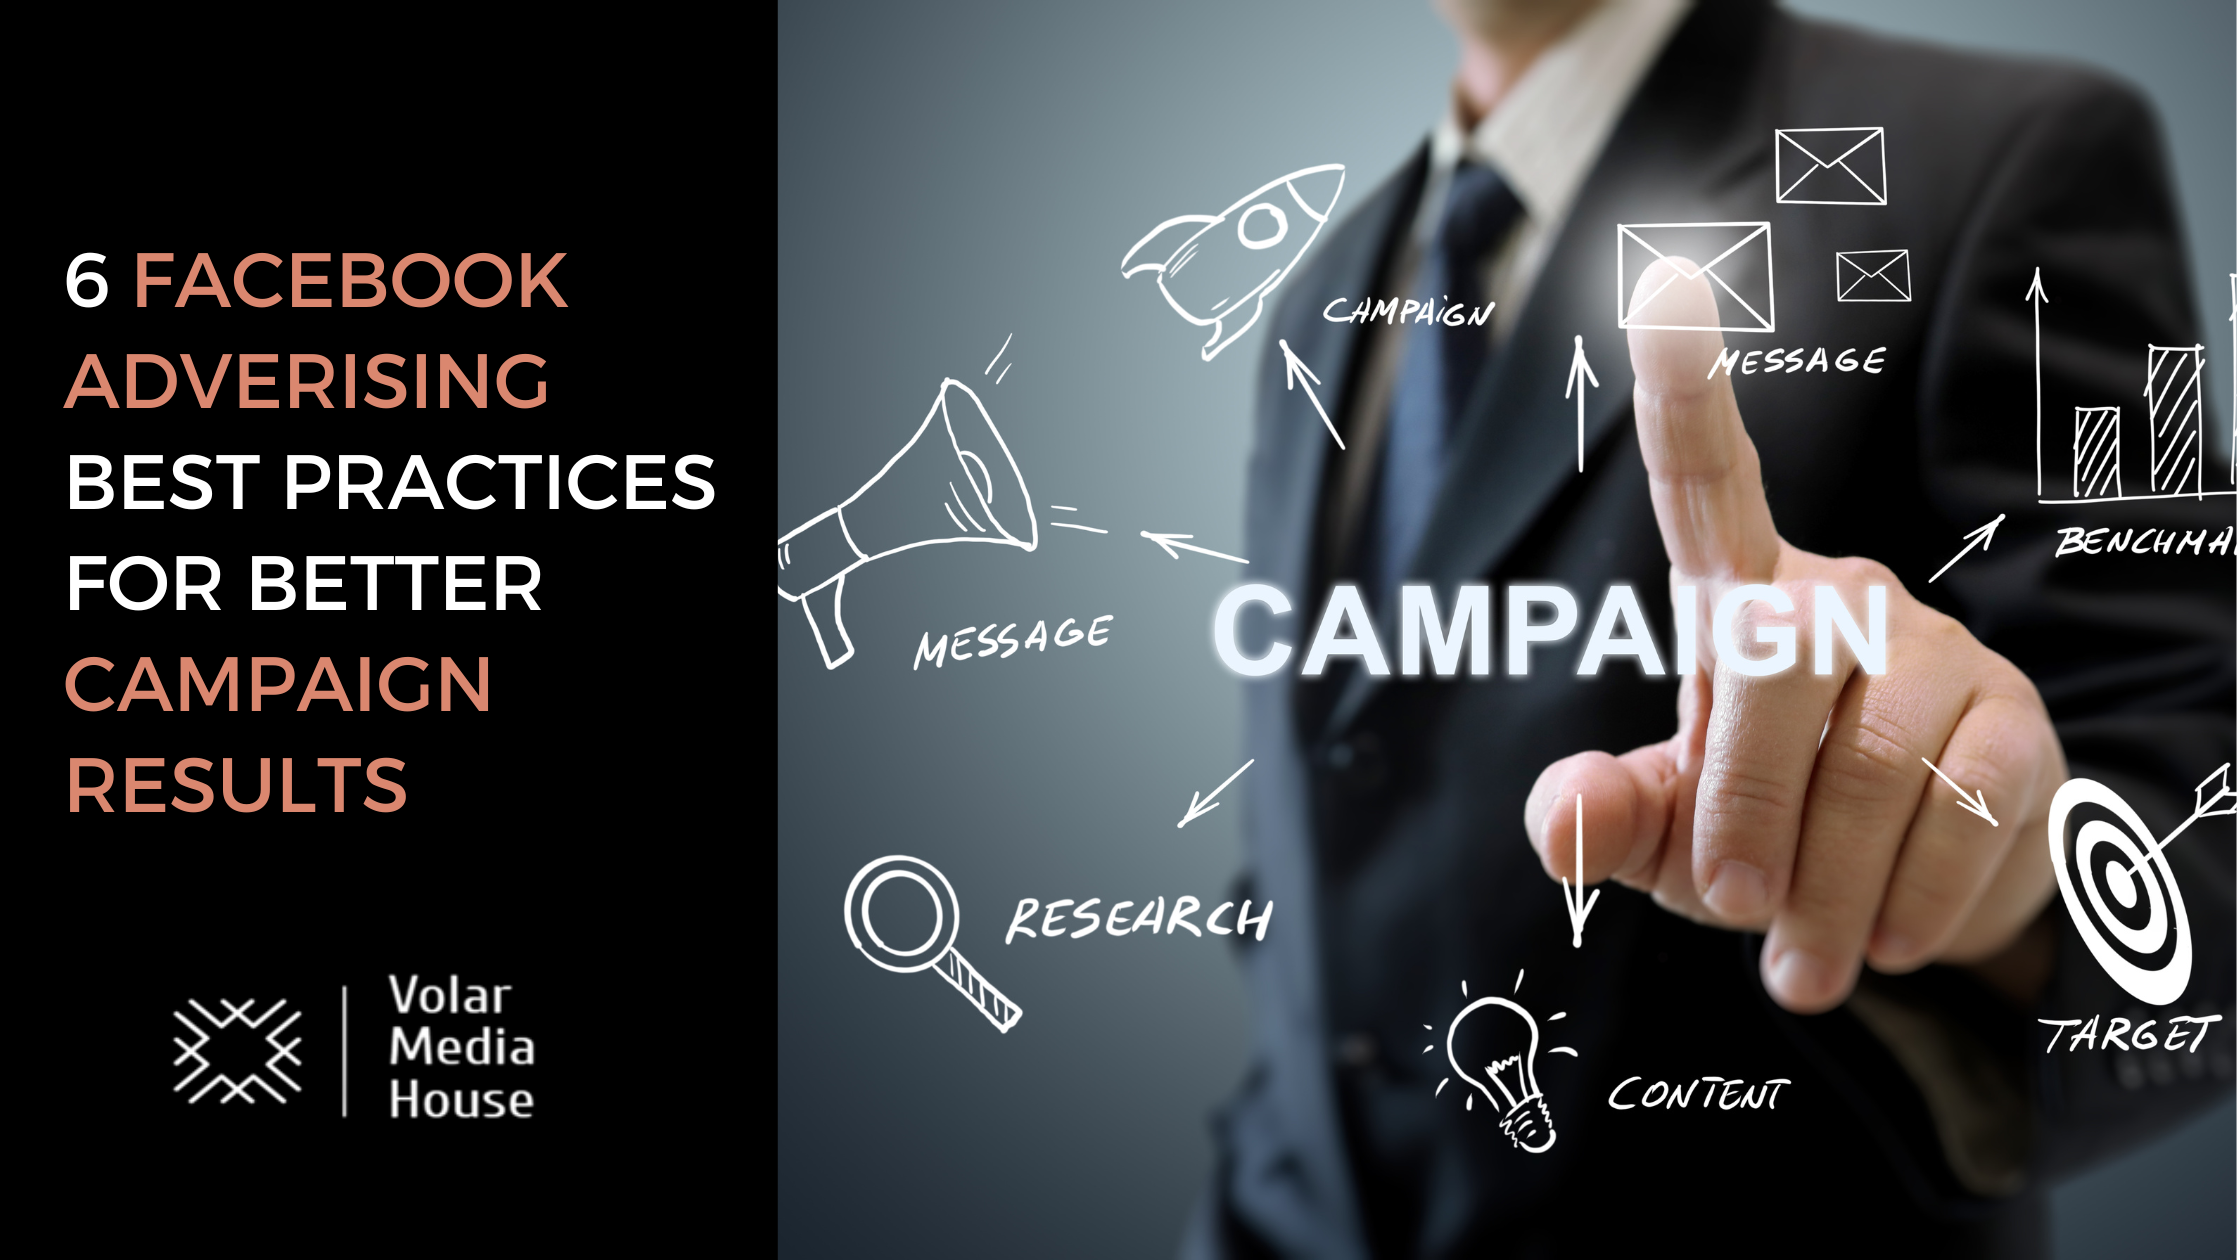 6 Facebook advertising best practices for better campaign results